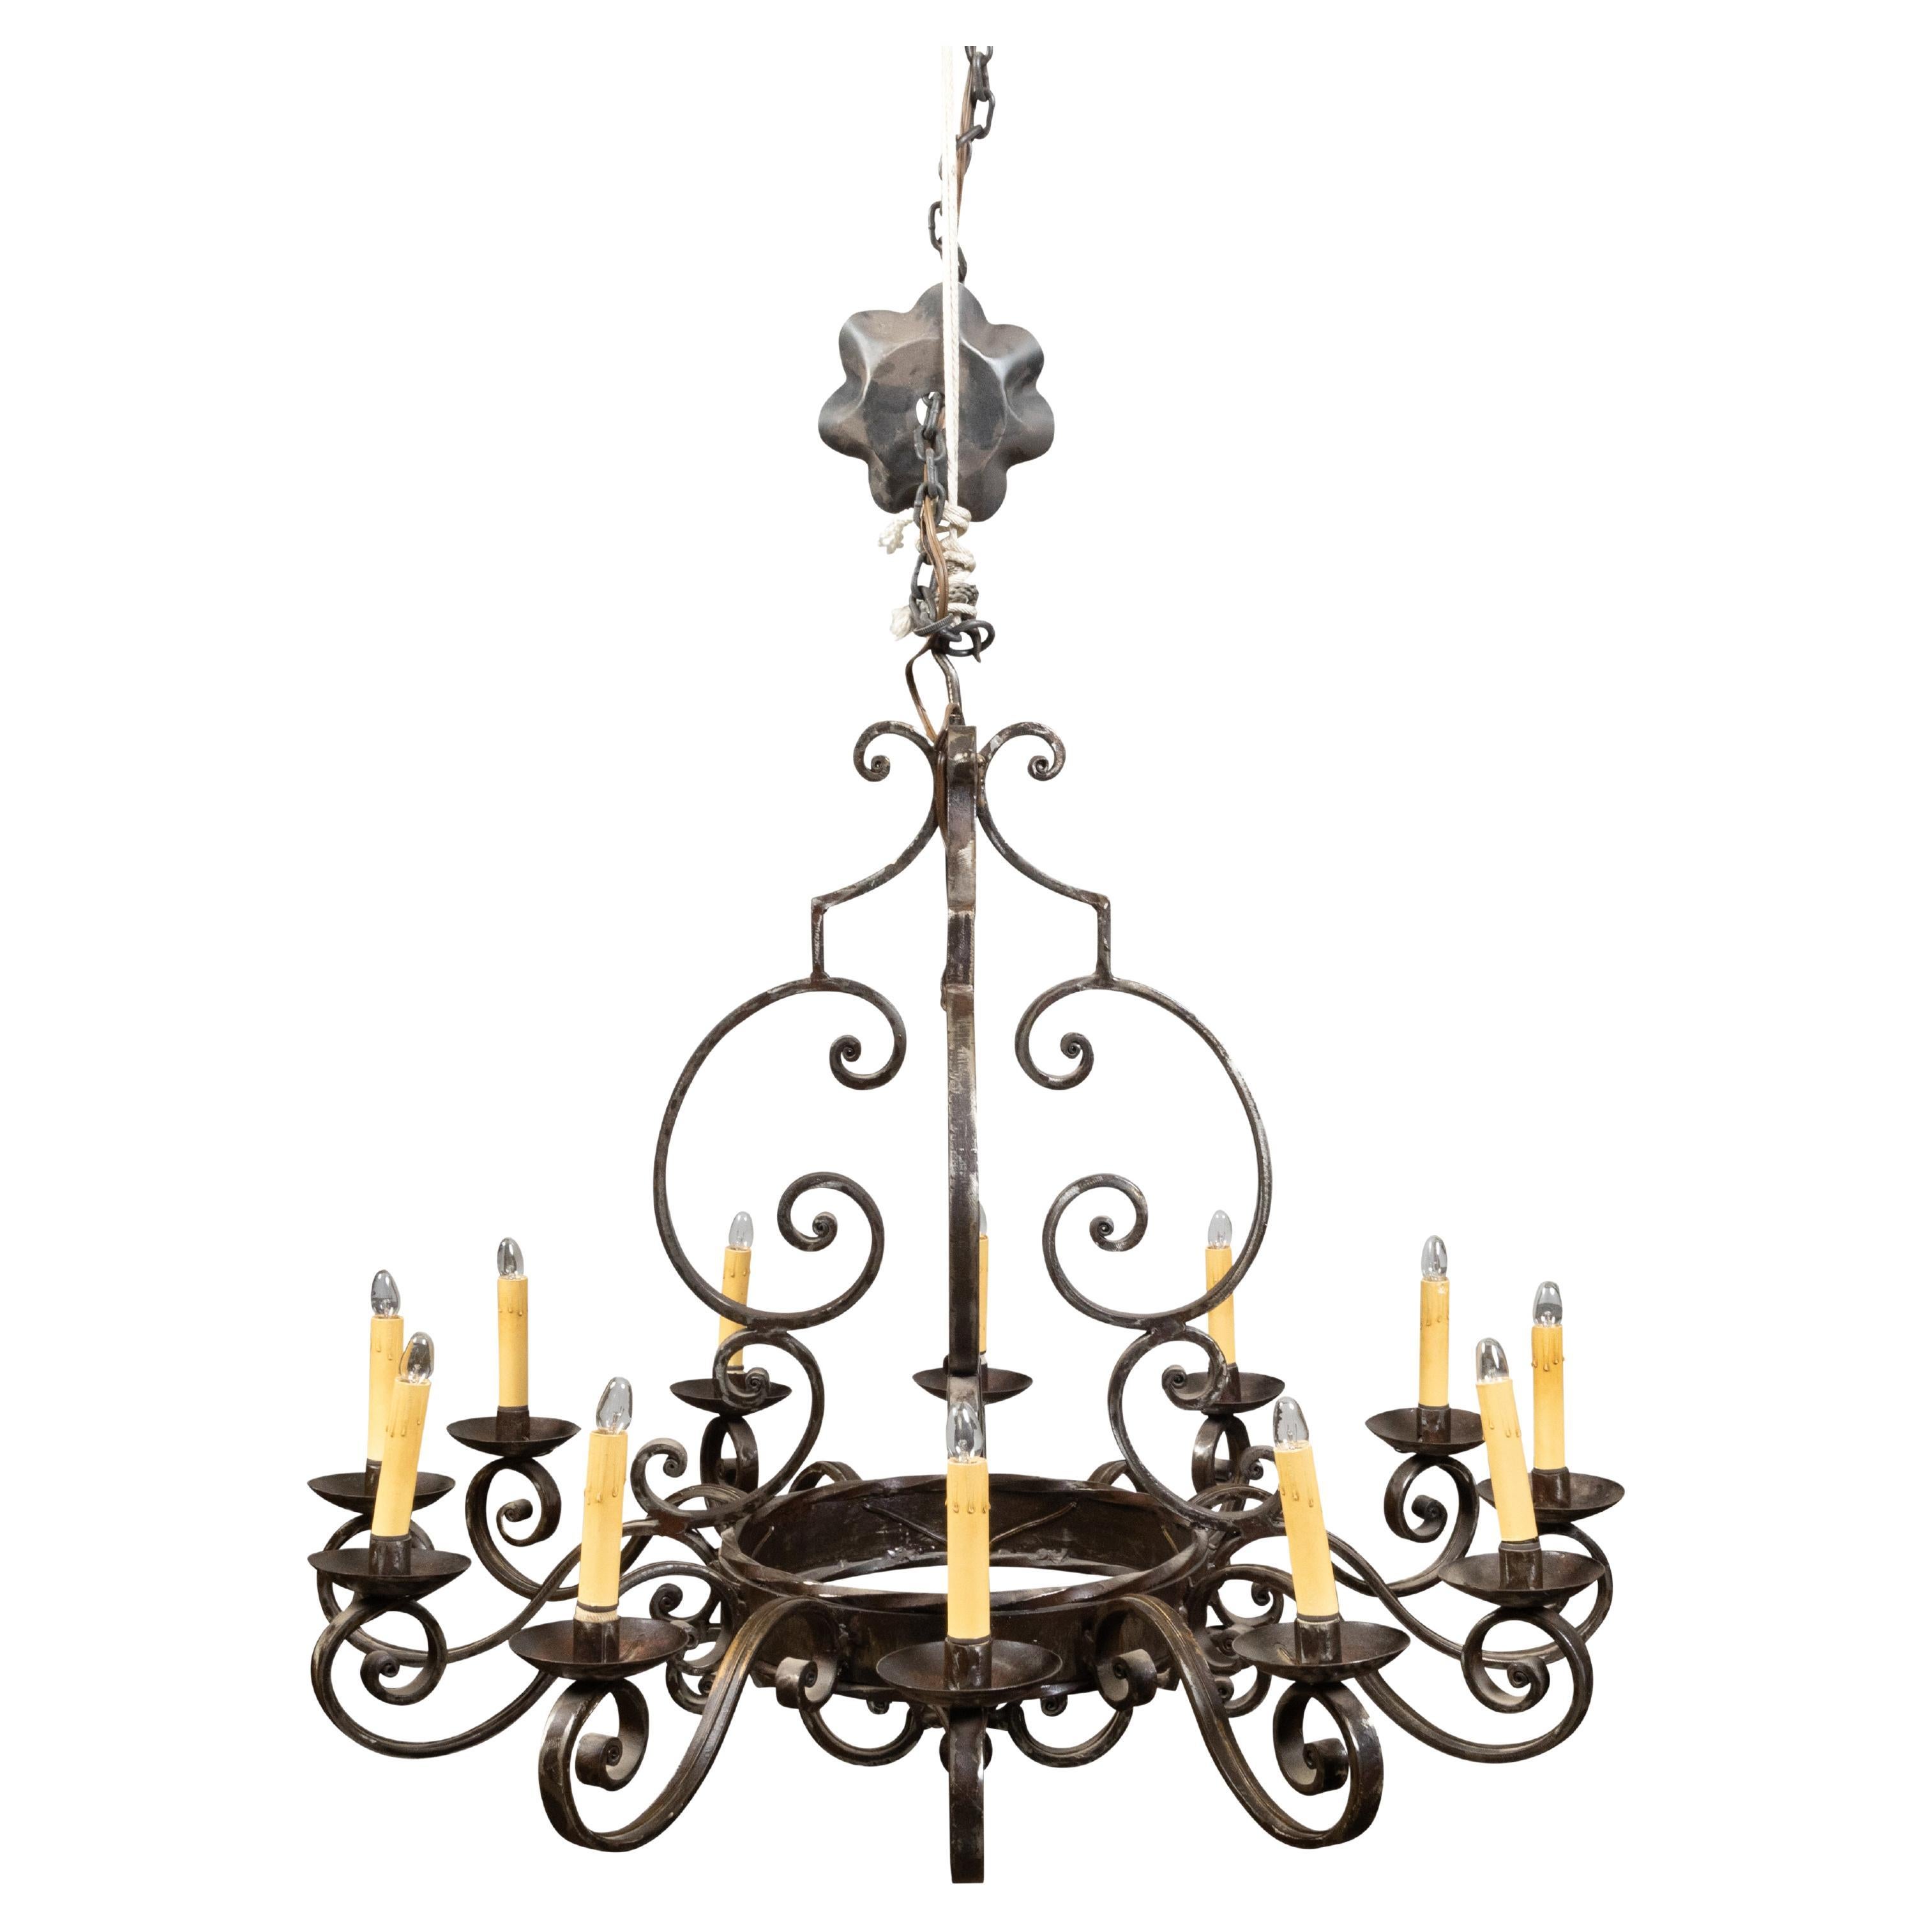 Midcentury French Steel 12-Light Chandelier with Scrolls and Dark Patina For Sale